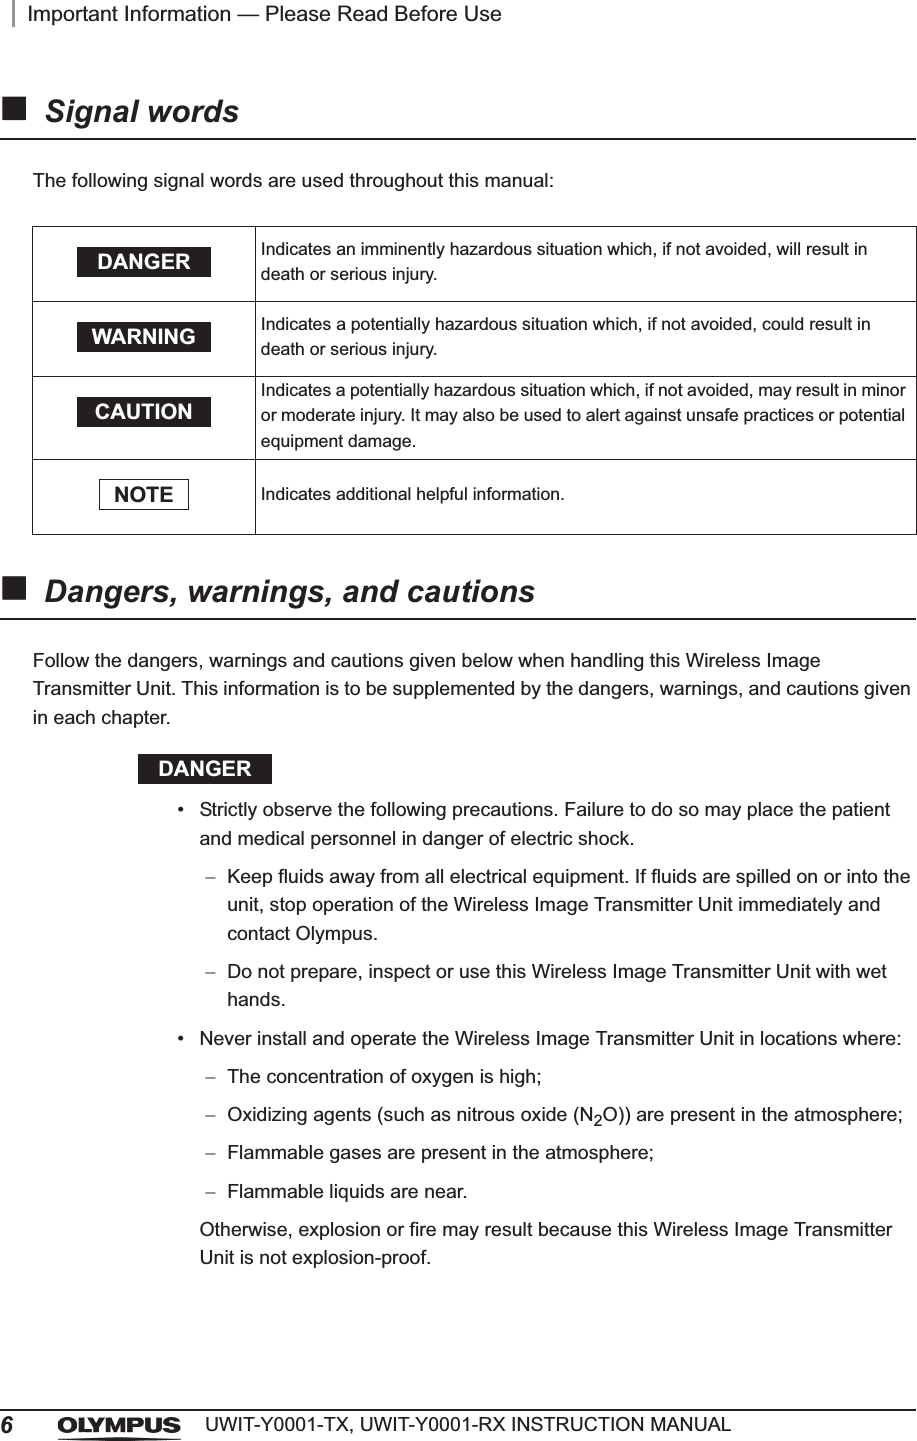 6Important Information — Please Read Before UseUWIT-Y0001-TX, UWIT-Y0001-RX INSTRUCTION MANUALSignal wordsThe following signal words are used throughout this manual:Dangers, warnings, and cautionsFollow the dangers, warnings and cautions given below when handling this Wireless Image Transmitter Unit. This information is to be supplemented by the dangers, warnings, and cautions given in each chapter.DANGER• Strictly observe the following precautions. Failure to do so may place the patient and medical personnel in danger of electric shock.Keep fluids away from all electrical equipment. If fluids are spilled on or into the unit, stop operation of the Wireless Image Transmitter Unit immediately and contact Olympus.Do not prepare, inspect or use this Wireless Image Transmitter Unit with wet hands.• Never install and operate the Wireless Image Transmitter Unit in locations where:The concentration of oxygen is high;Oxidizing agents (such as nitrous oxide (N2O)) are present in the atmosphere;Flammable gases are present in the atmosphere;Flammable liquids are near.Otherwise, explosion or fire may result because this Wireless Image Transmitter Unit is not explosion-proof.Indicates an imminently hazardous situation which, if not avoided, will result in death or serious injury.Indicates a potentially hazardous situation which, if not avoided, could result in death or serious injury.Indicates a potentially hazardous situation which, if not avoided, may result in minor or moderate injury. It may also be used to alert against unsafe practices or potential equipment damage.Indicates additional helpful information.DANGERWARNINGCAUTIONNOTE